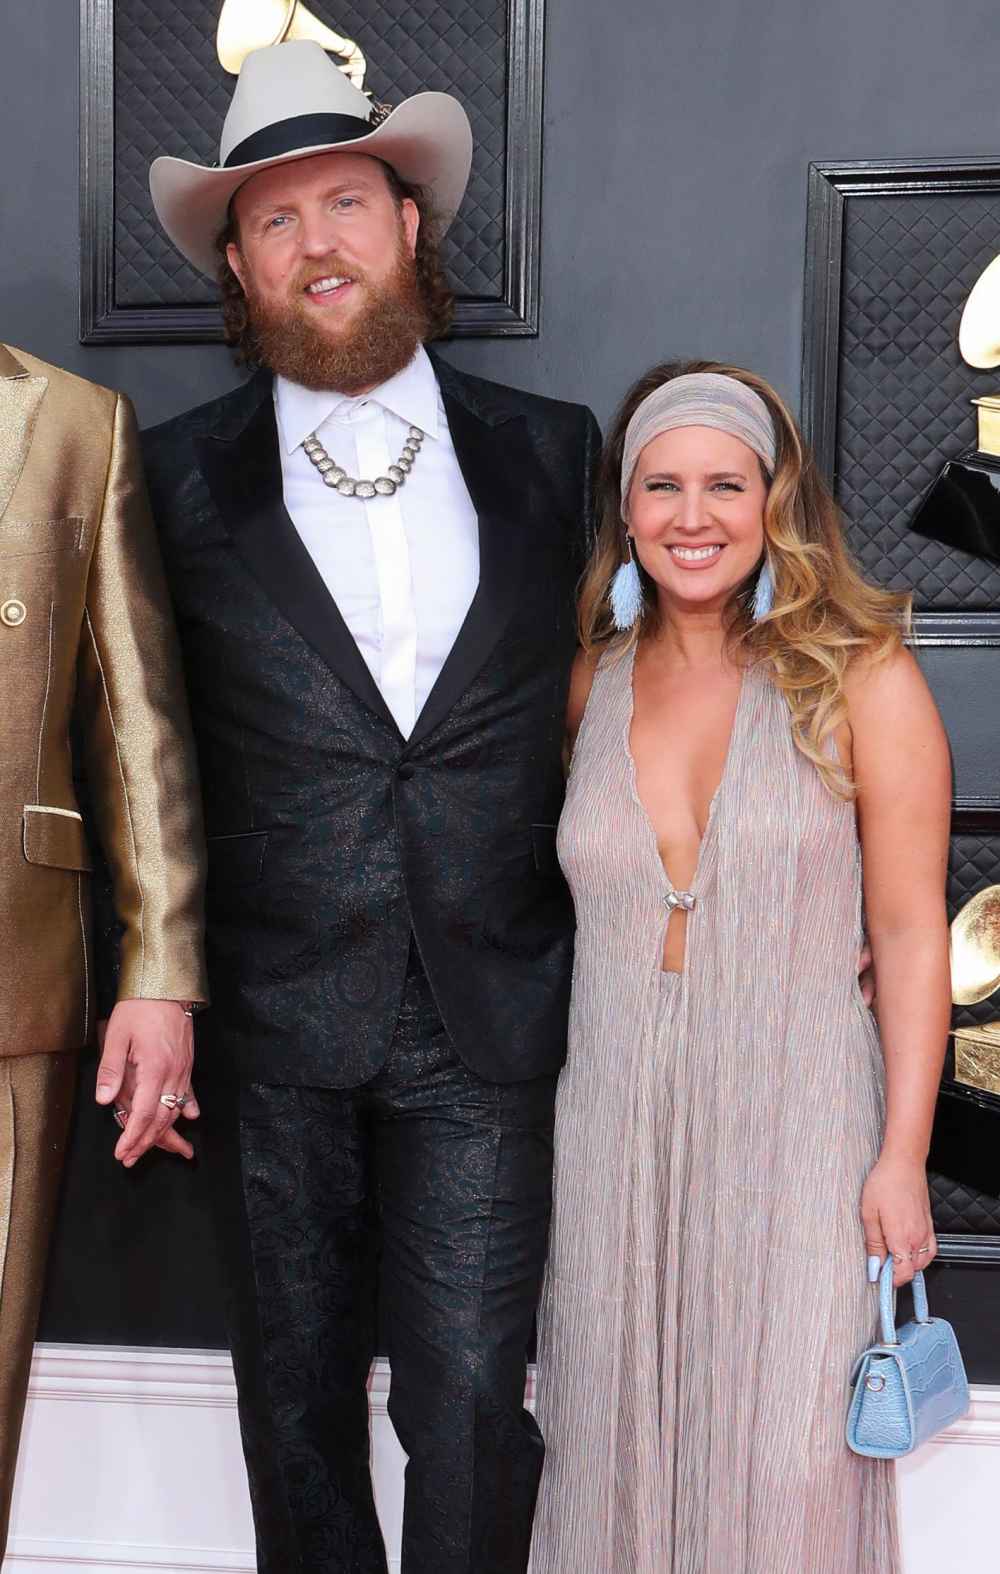 Brothers Osborne Musician John Osborne and Wife Lucie Silvas Expecting Twins- 'It's Official' 148 64th Annual Grammy Awards, Arrivals, MGM Grand Garden Arena, Las Vegas, USA - 03 Apr 2022